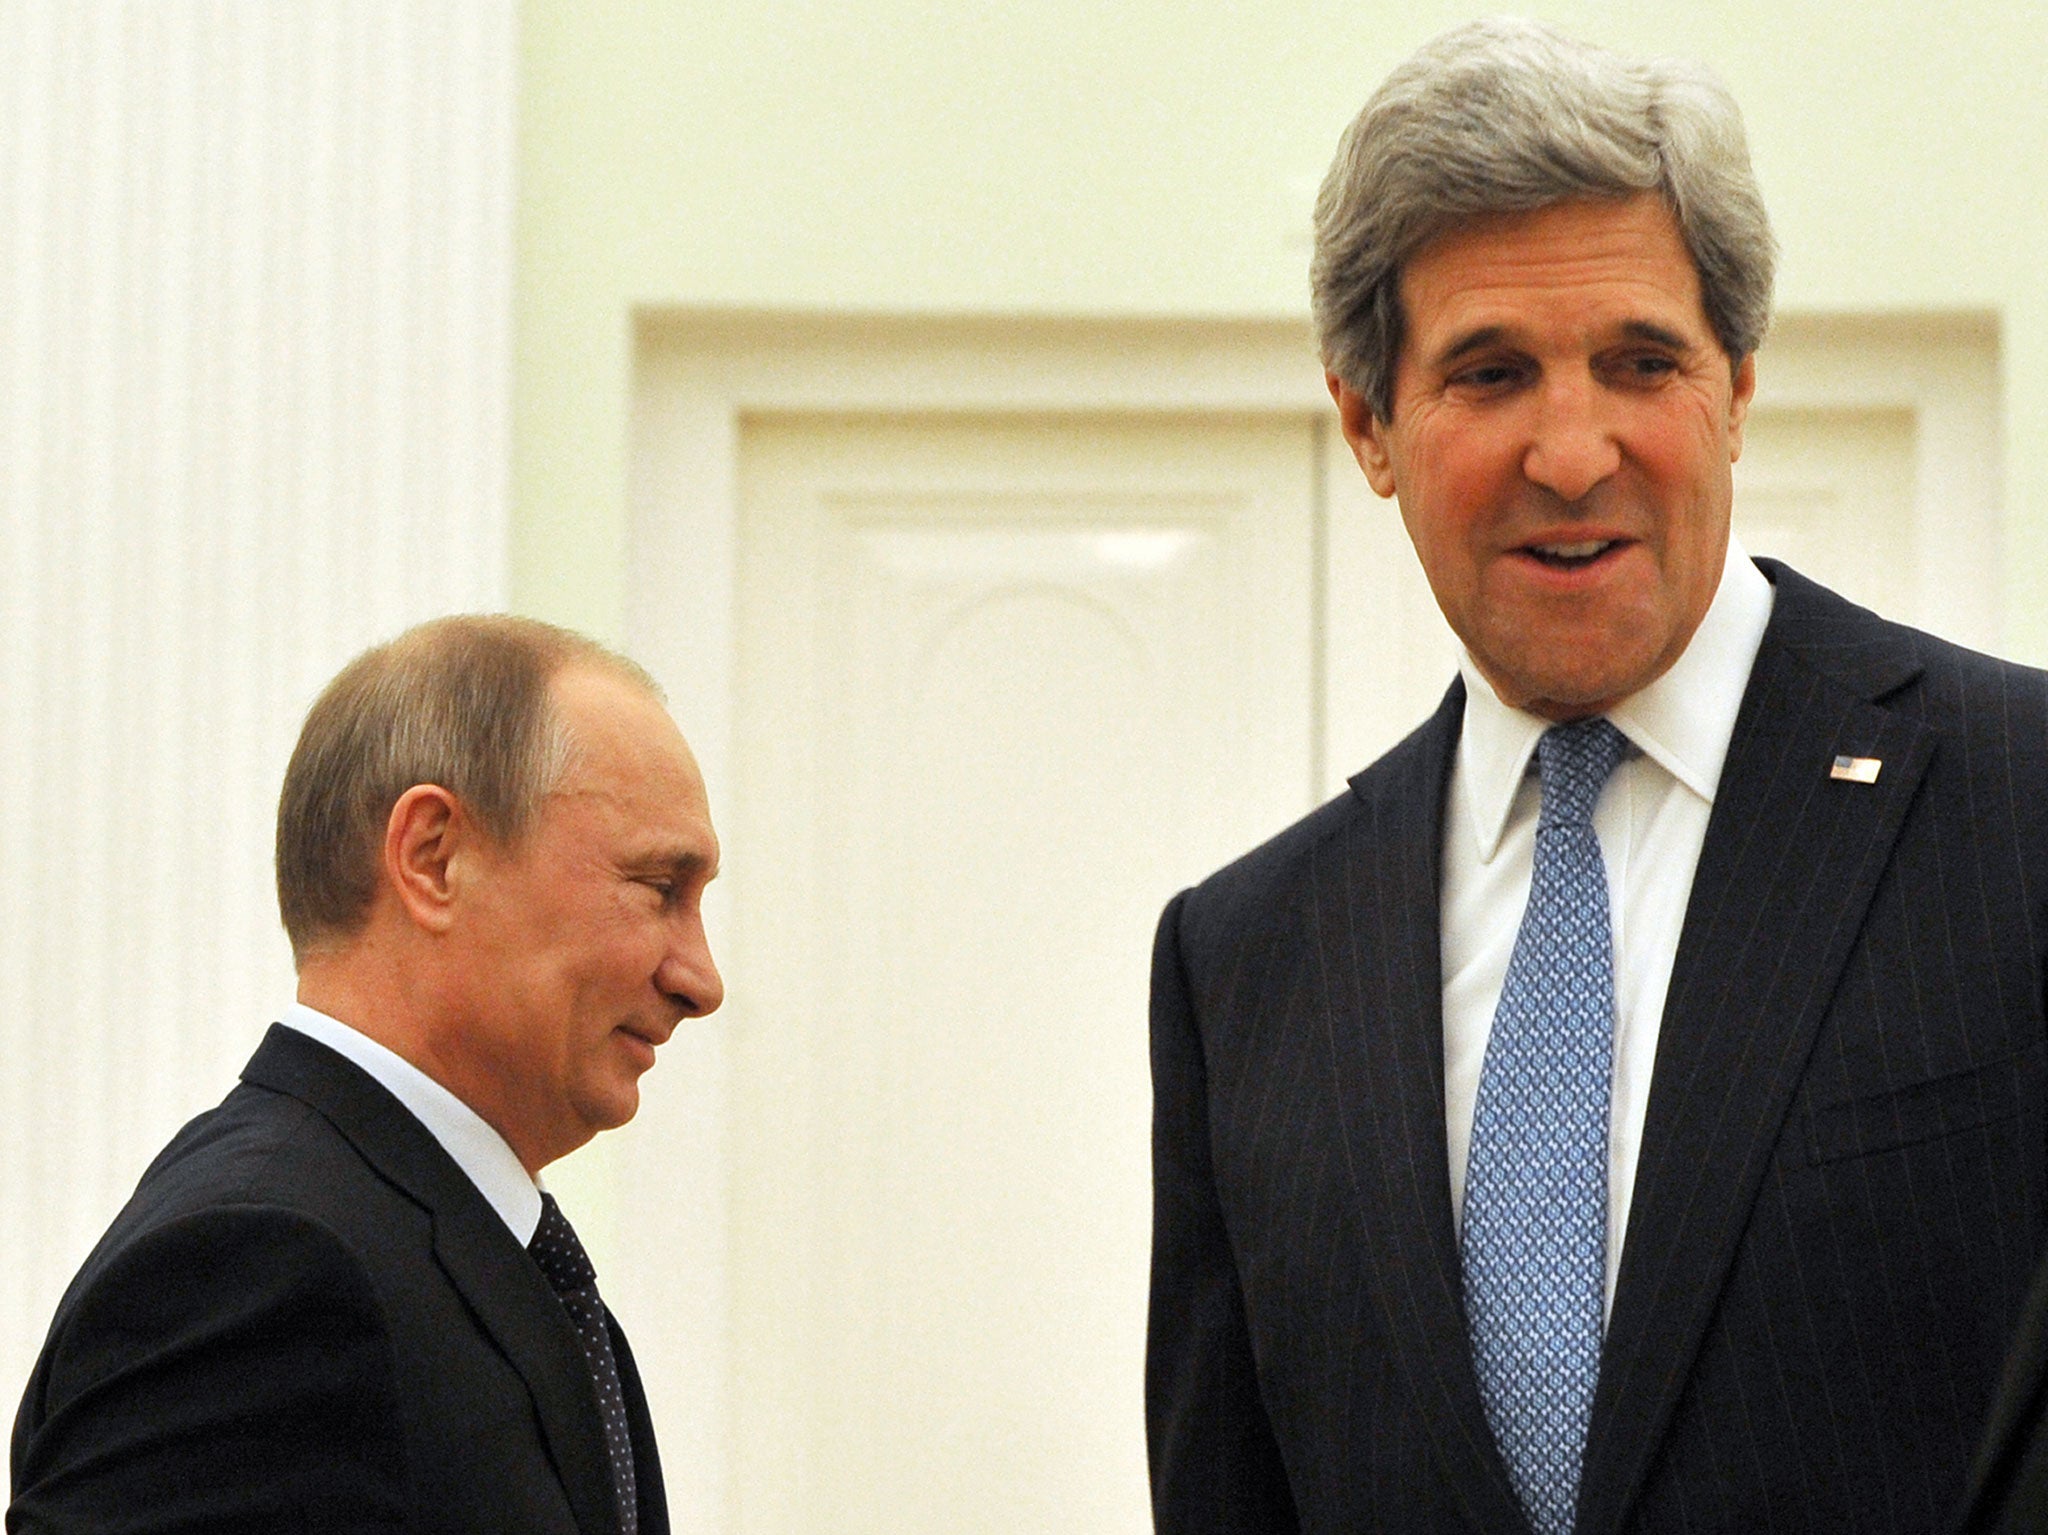 Russian President Vladimir Putin (L) and the US Secretary of State John Kerry take their seats prior their talks in Kremlin in Moscow on May 7, 2013. Kerry sought today to narrow differences over the conflict in Syria with Putin, urging the Russian strongman to find common ground to help end the bloodshed.